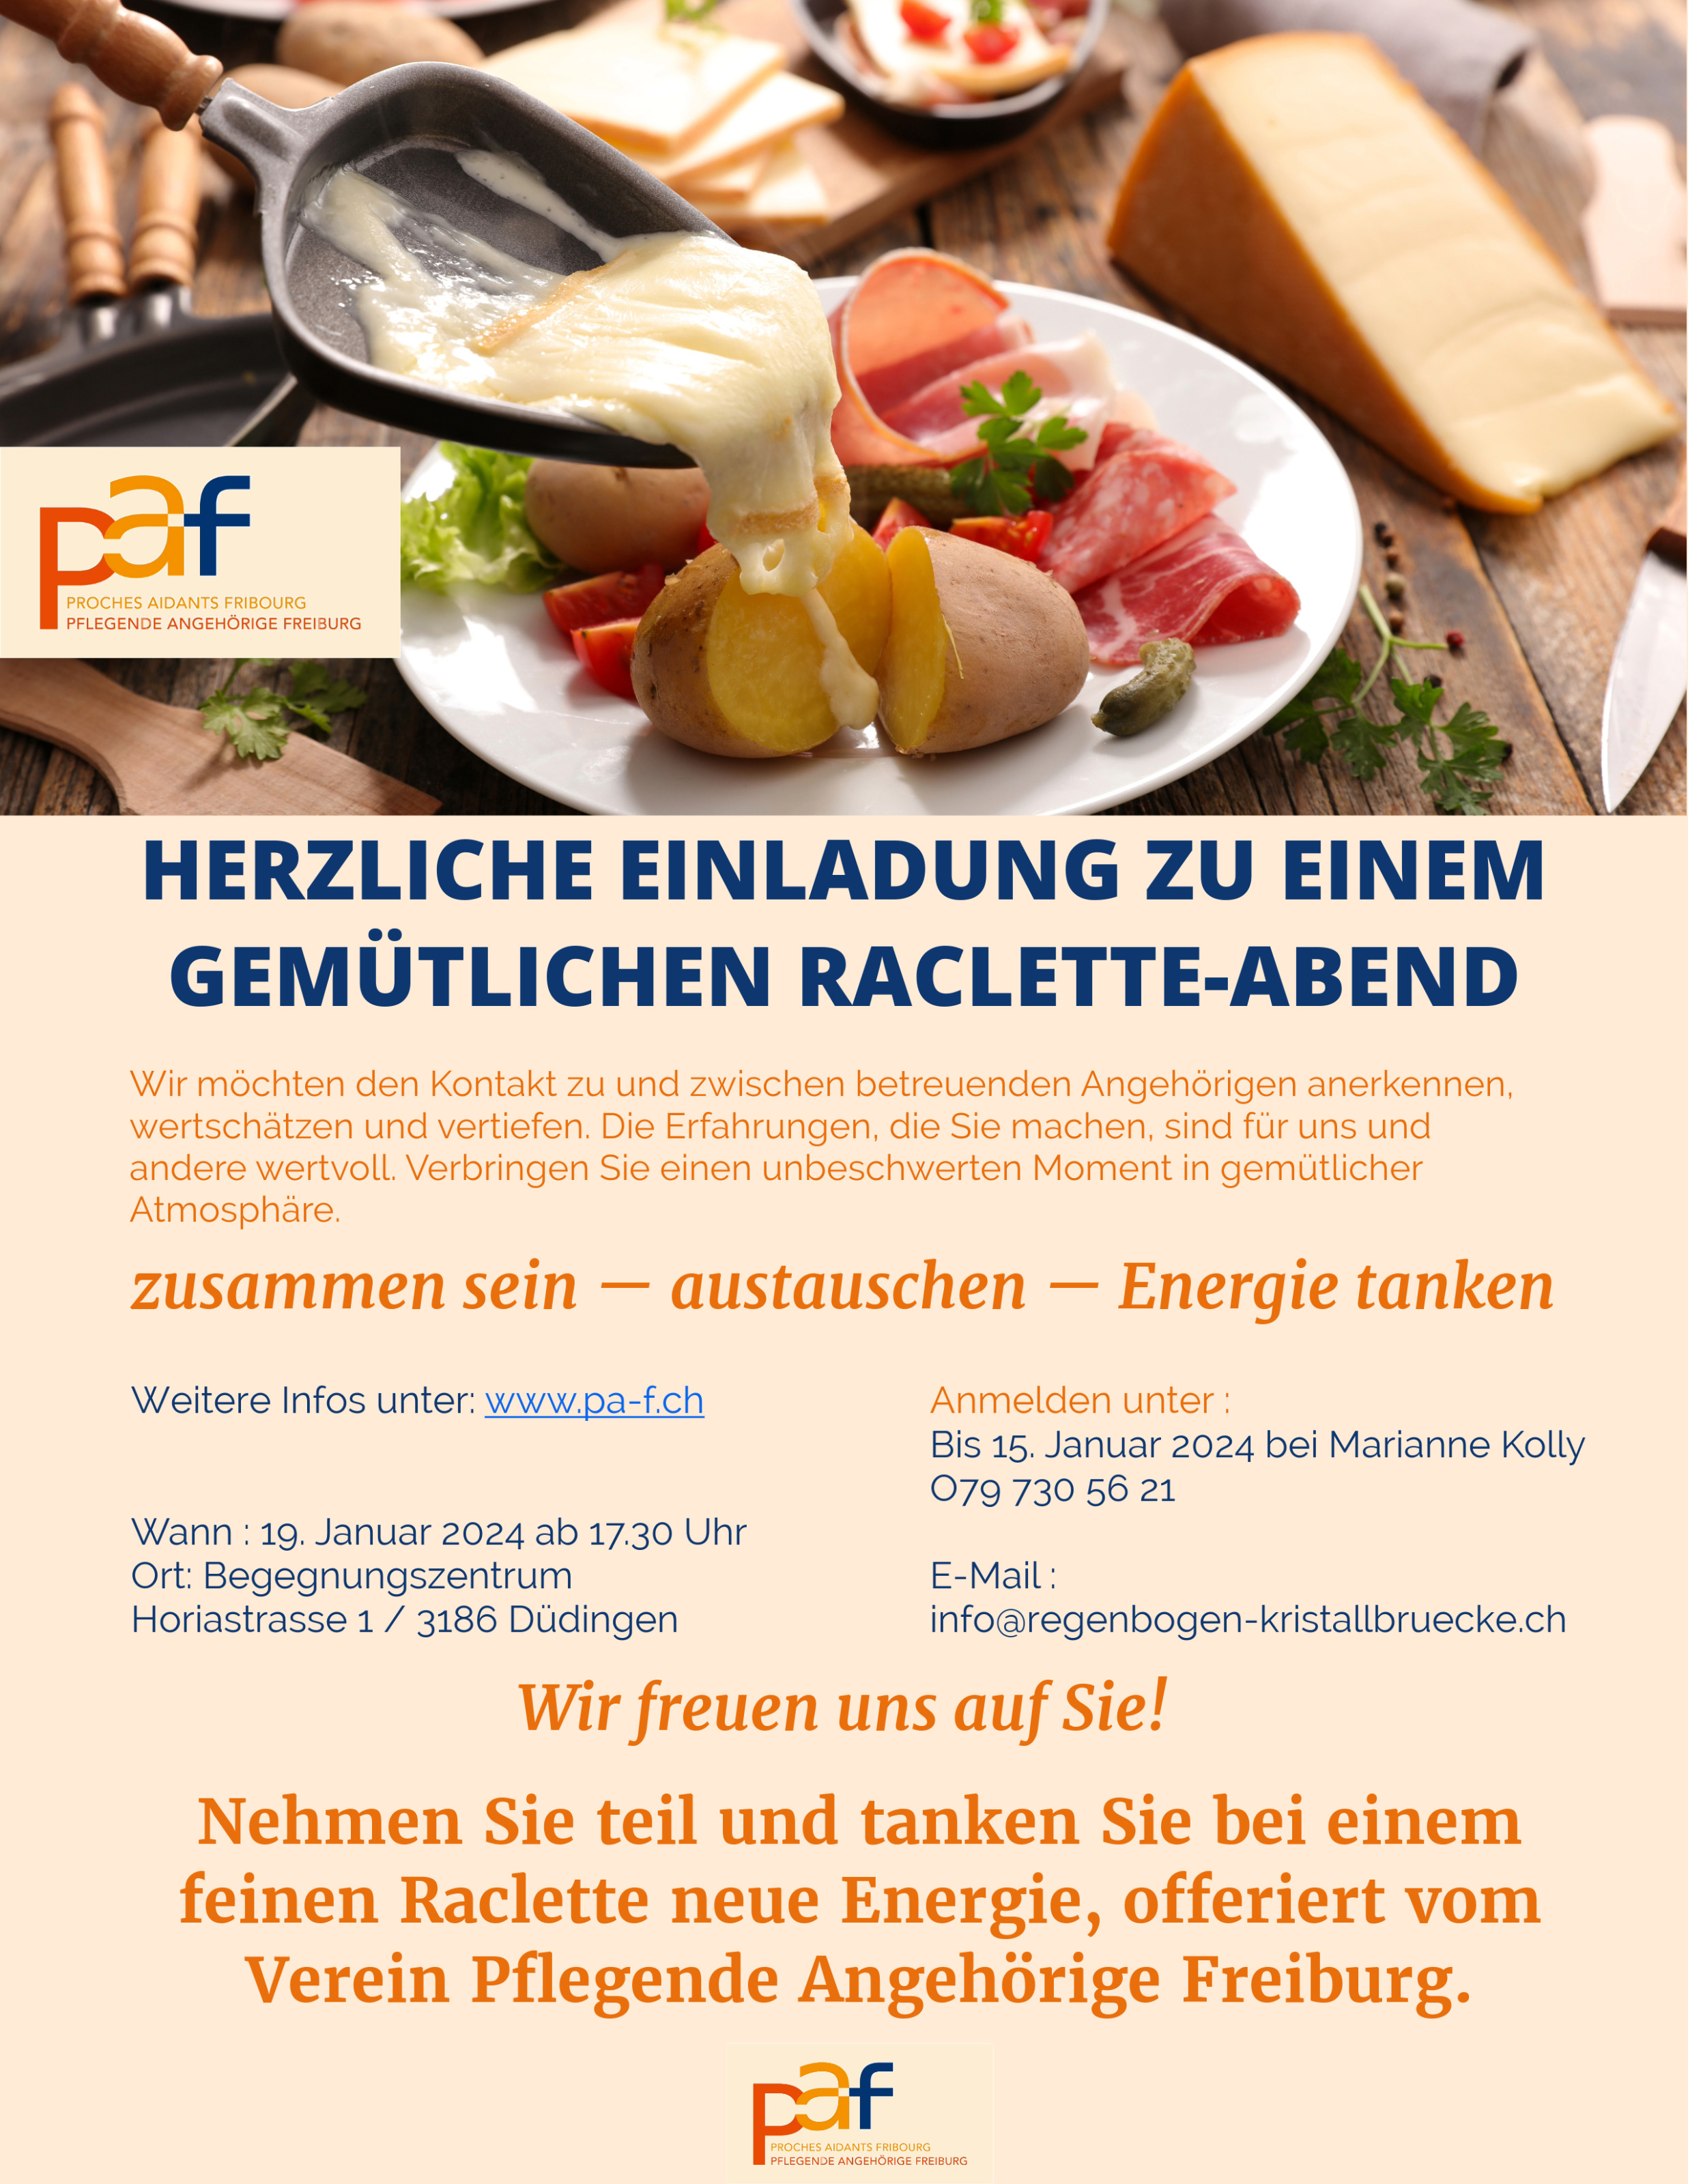 Image Raclette-Abend